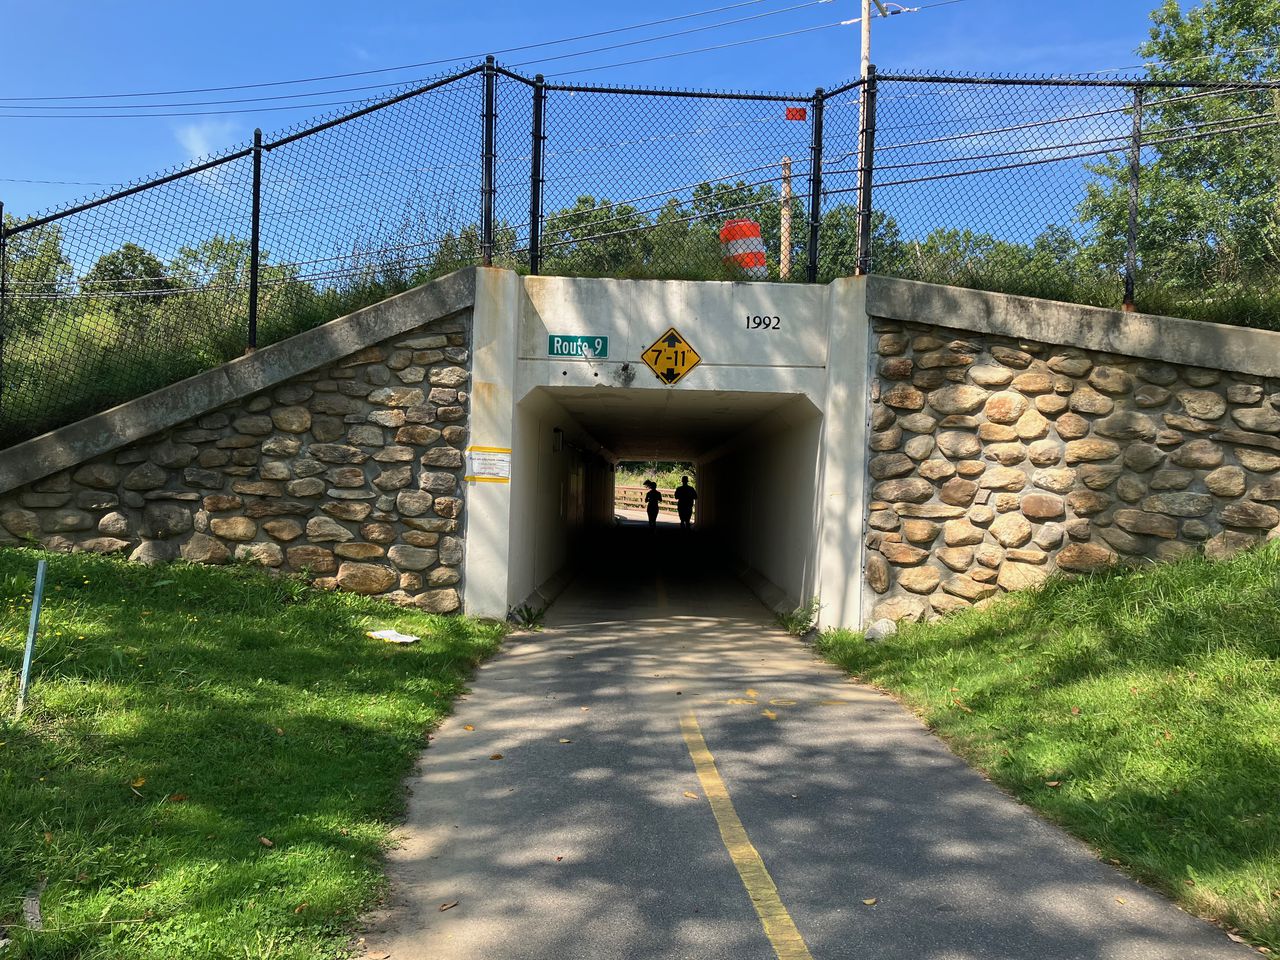 The Route 9 tunnel on the bike path in Hadley